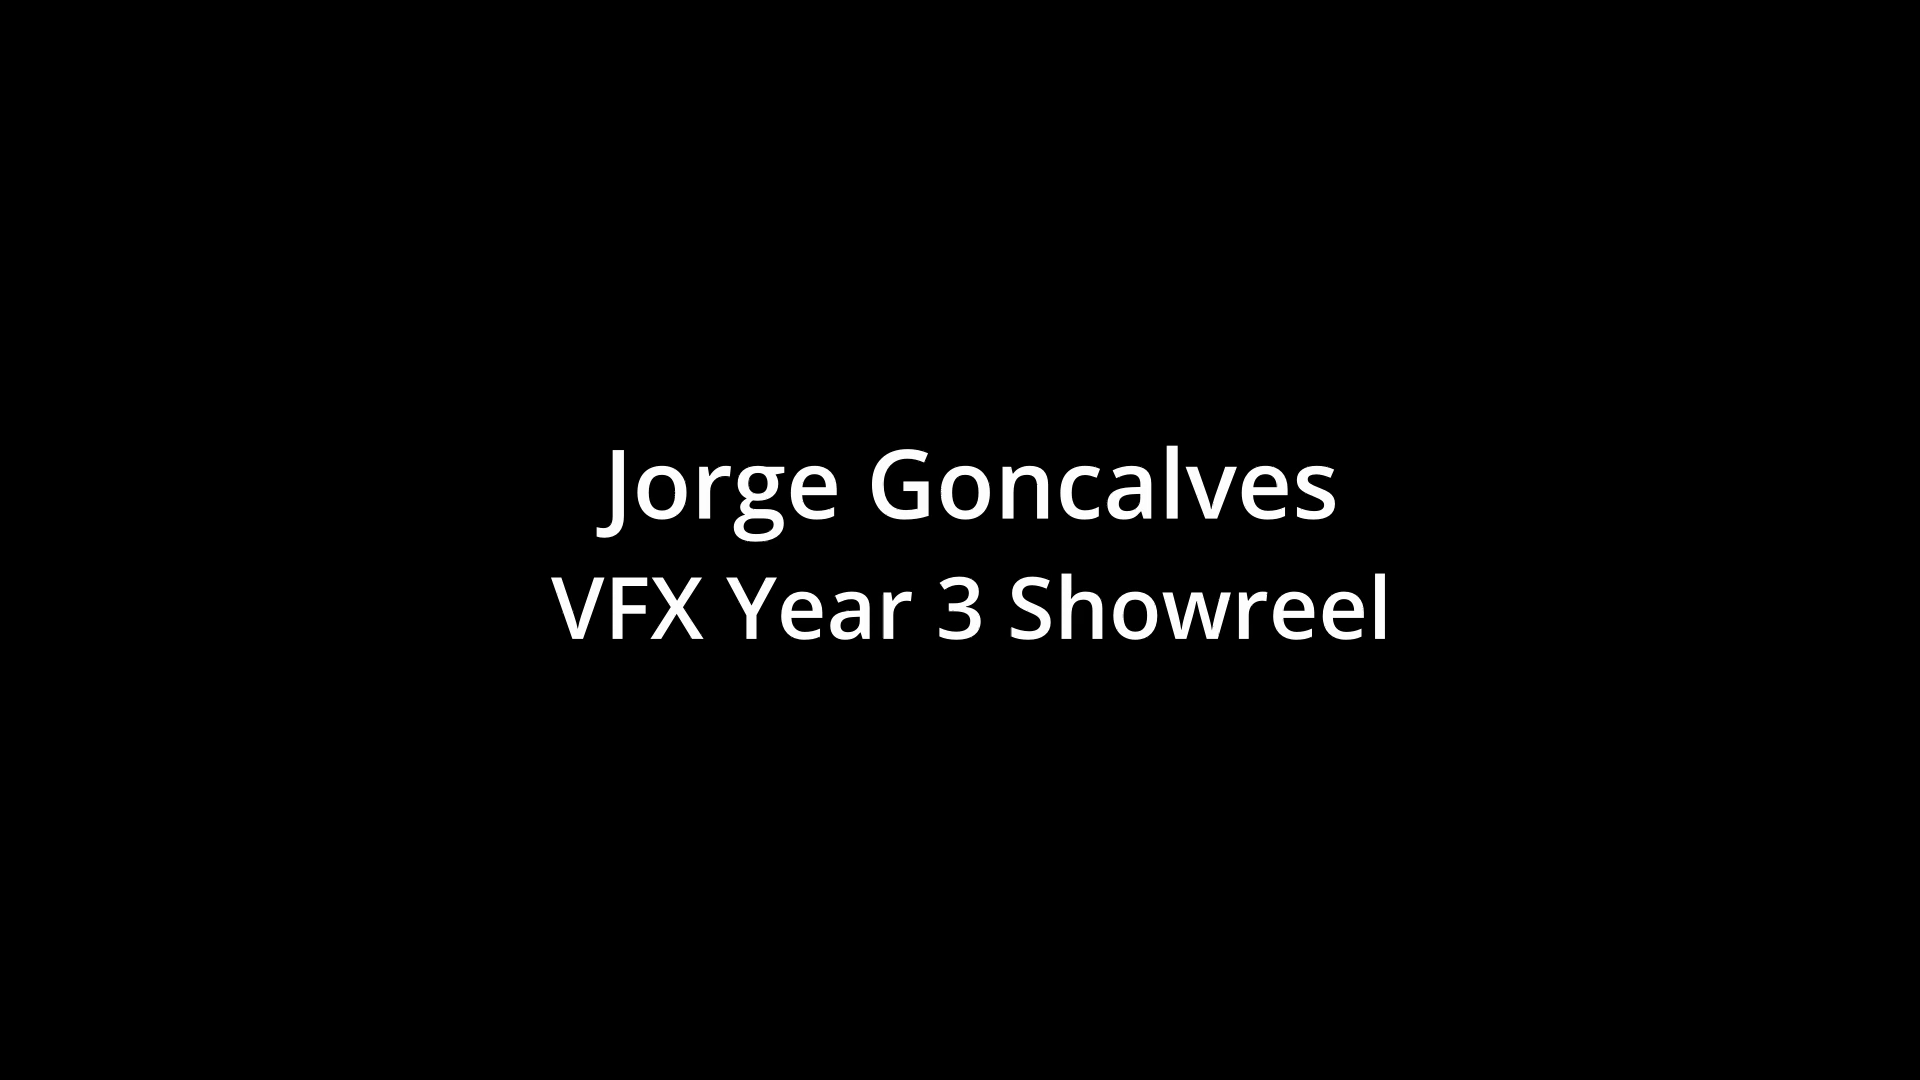 BA VFX Showreel by Jorge Goncalves showing a collection of 3D work done in the past few years